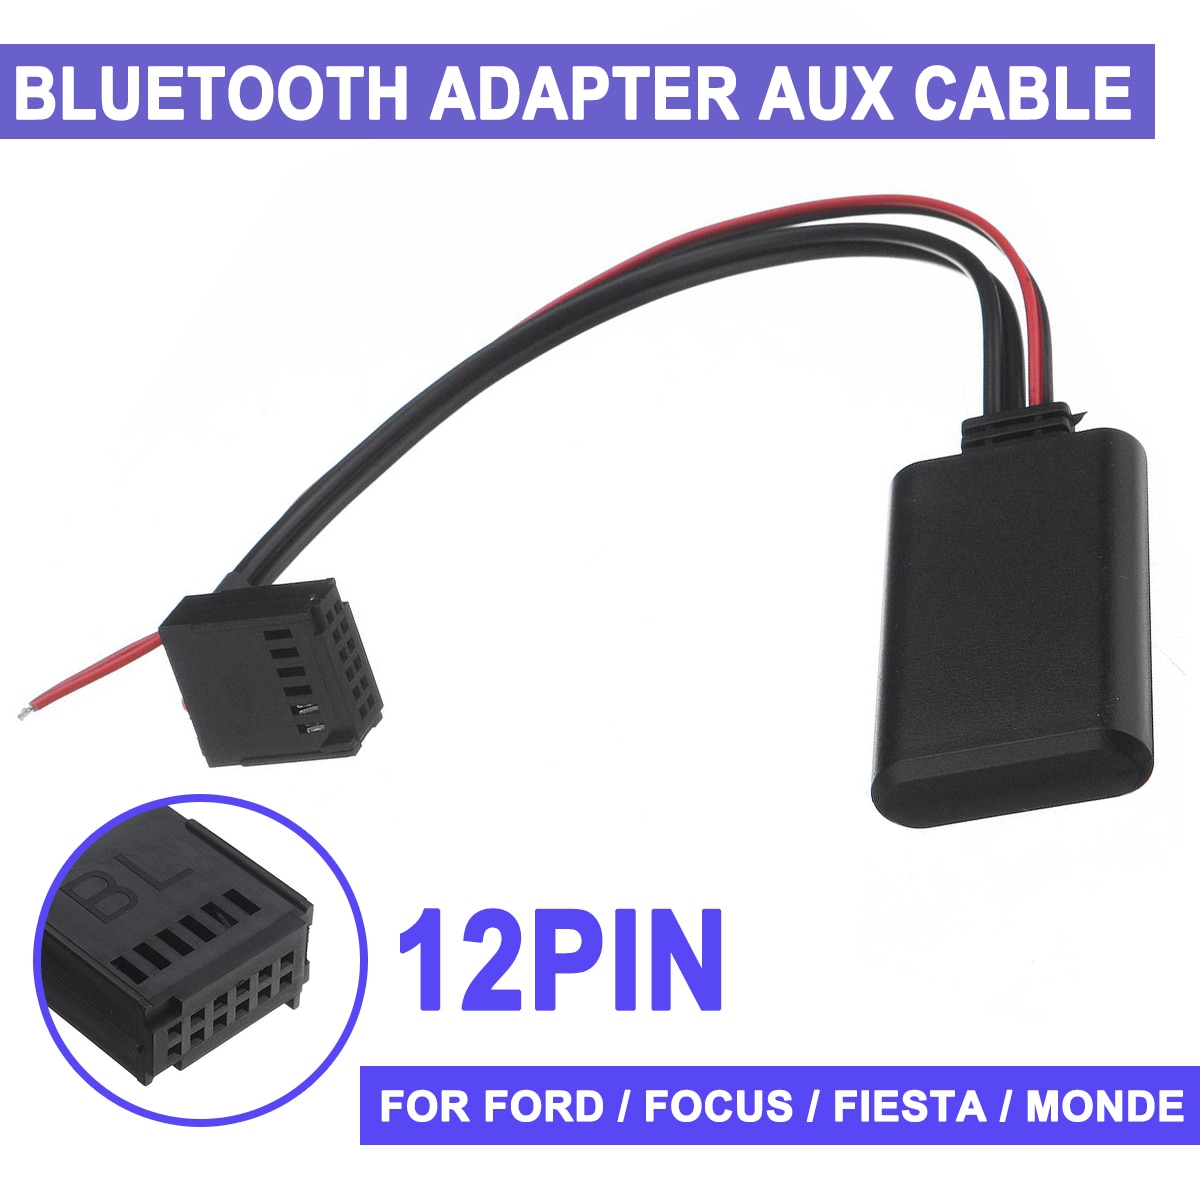 12V Auto Bluetooth Adapter Voor Ford Focus,Fiesta,Mondeo,C-Max, fusion Aux Module Kabel Stereo AUX-IN Voor Bluetooth Aux Auto Kit